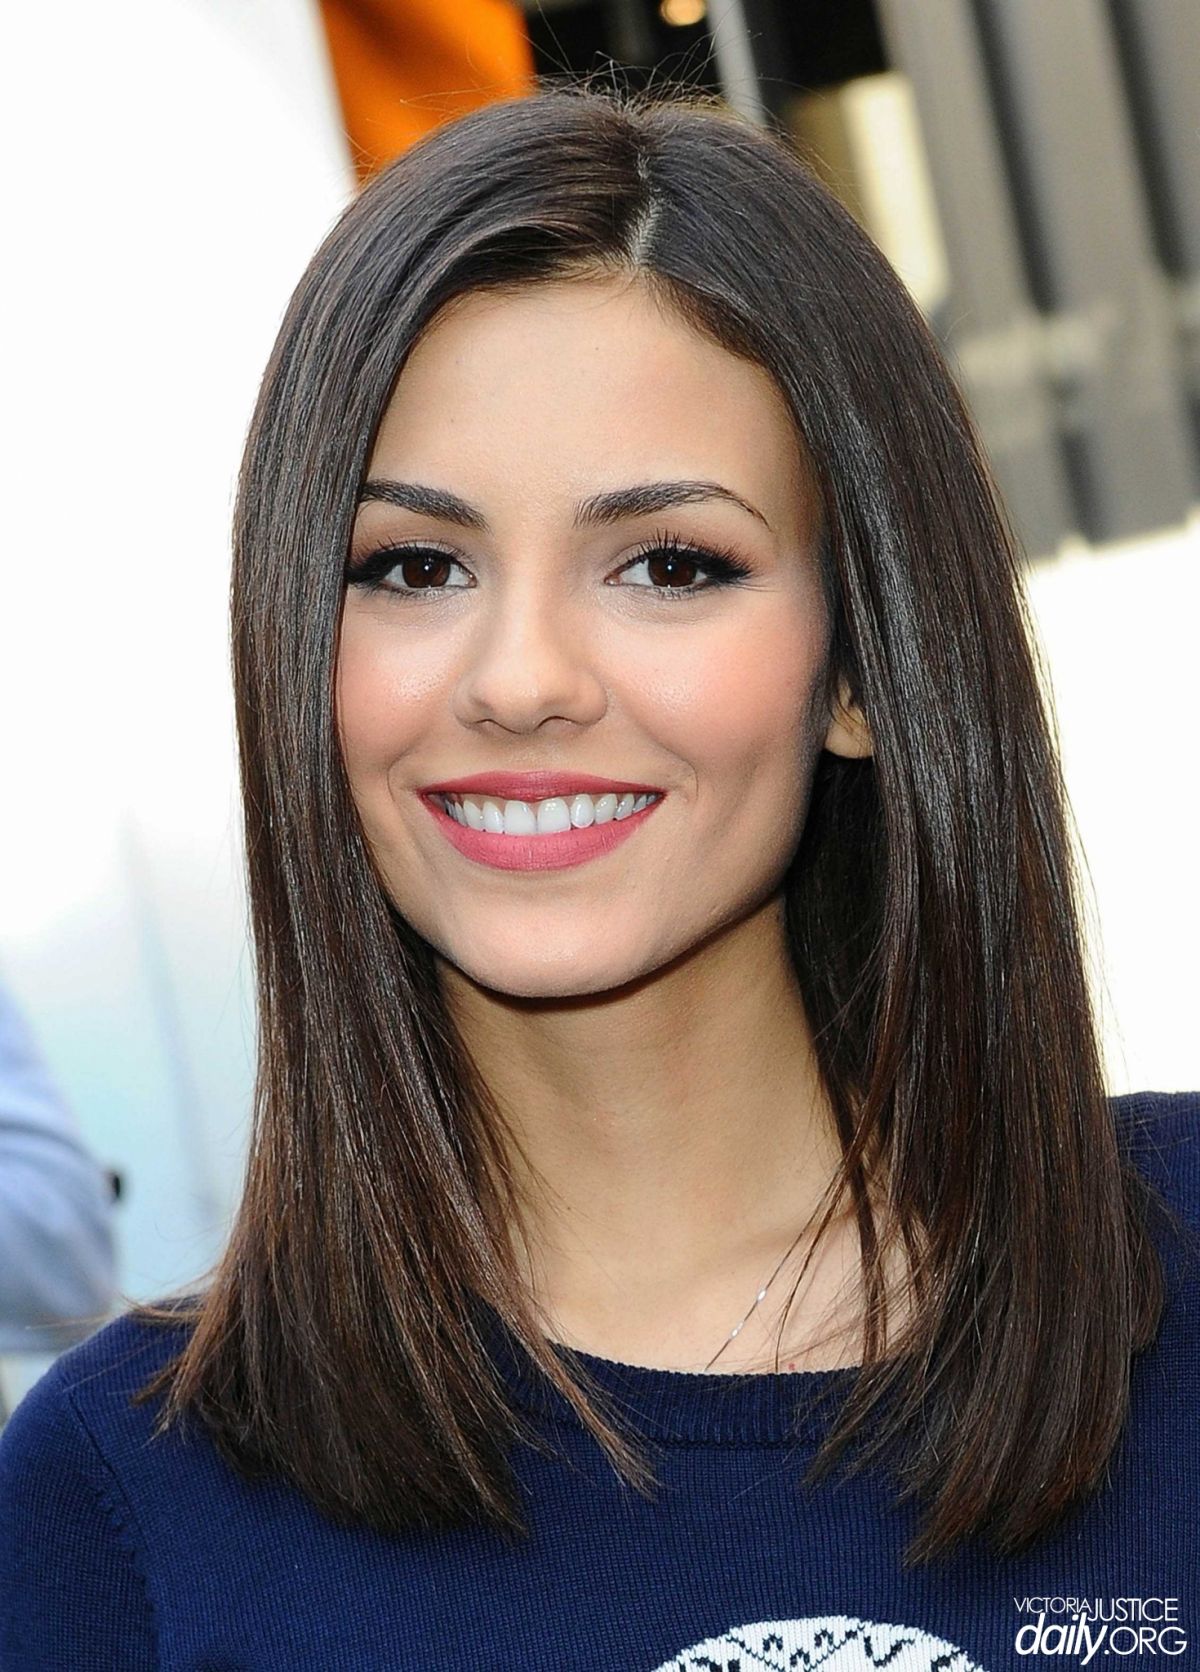 78 Best images about victoria justice on Pinterest | Victorious